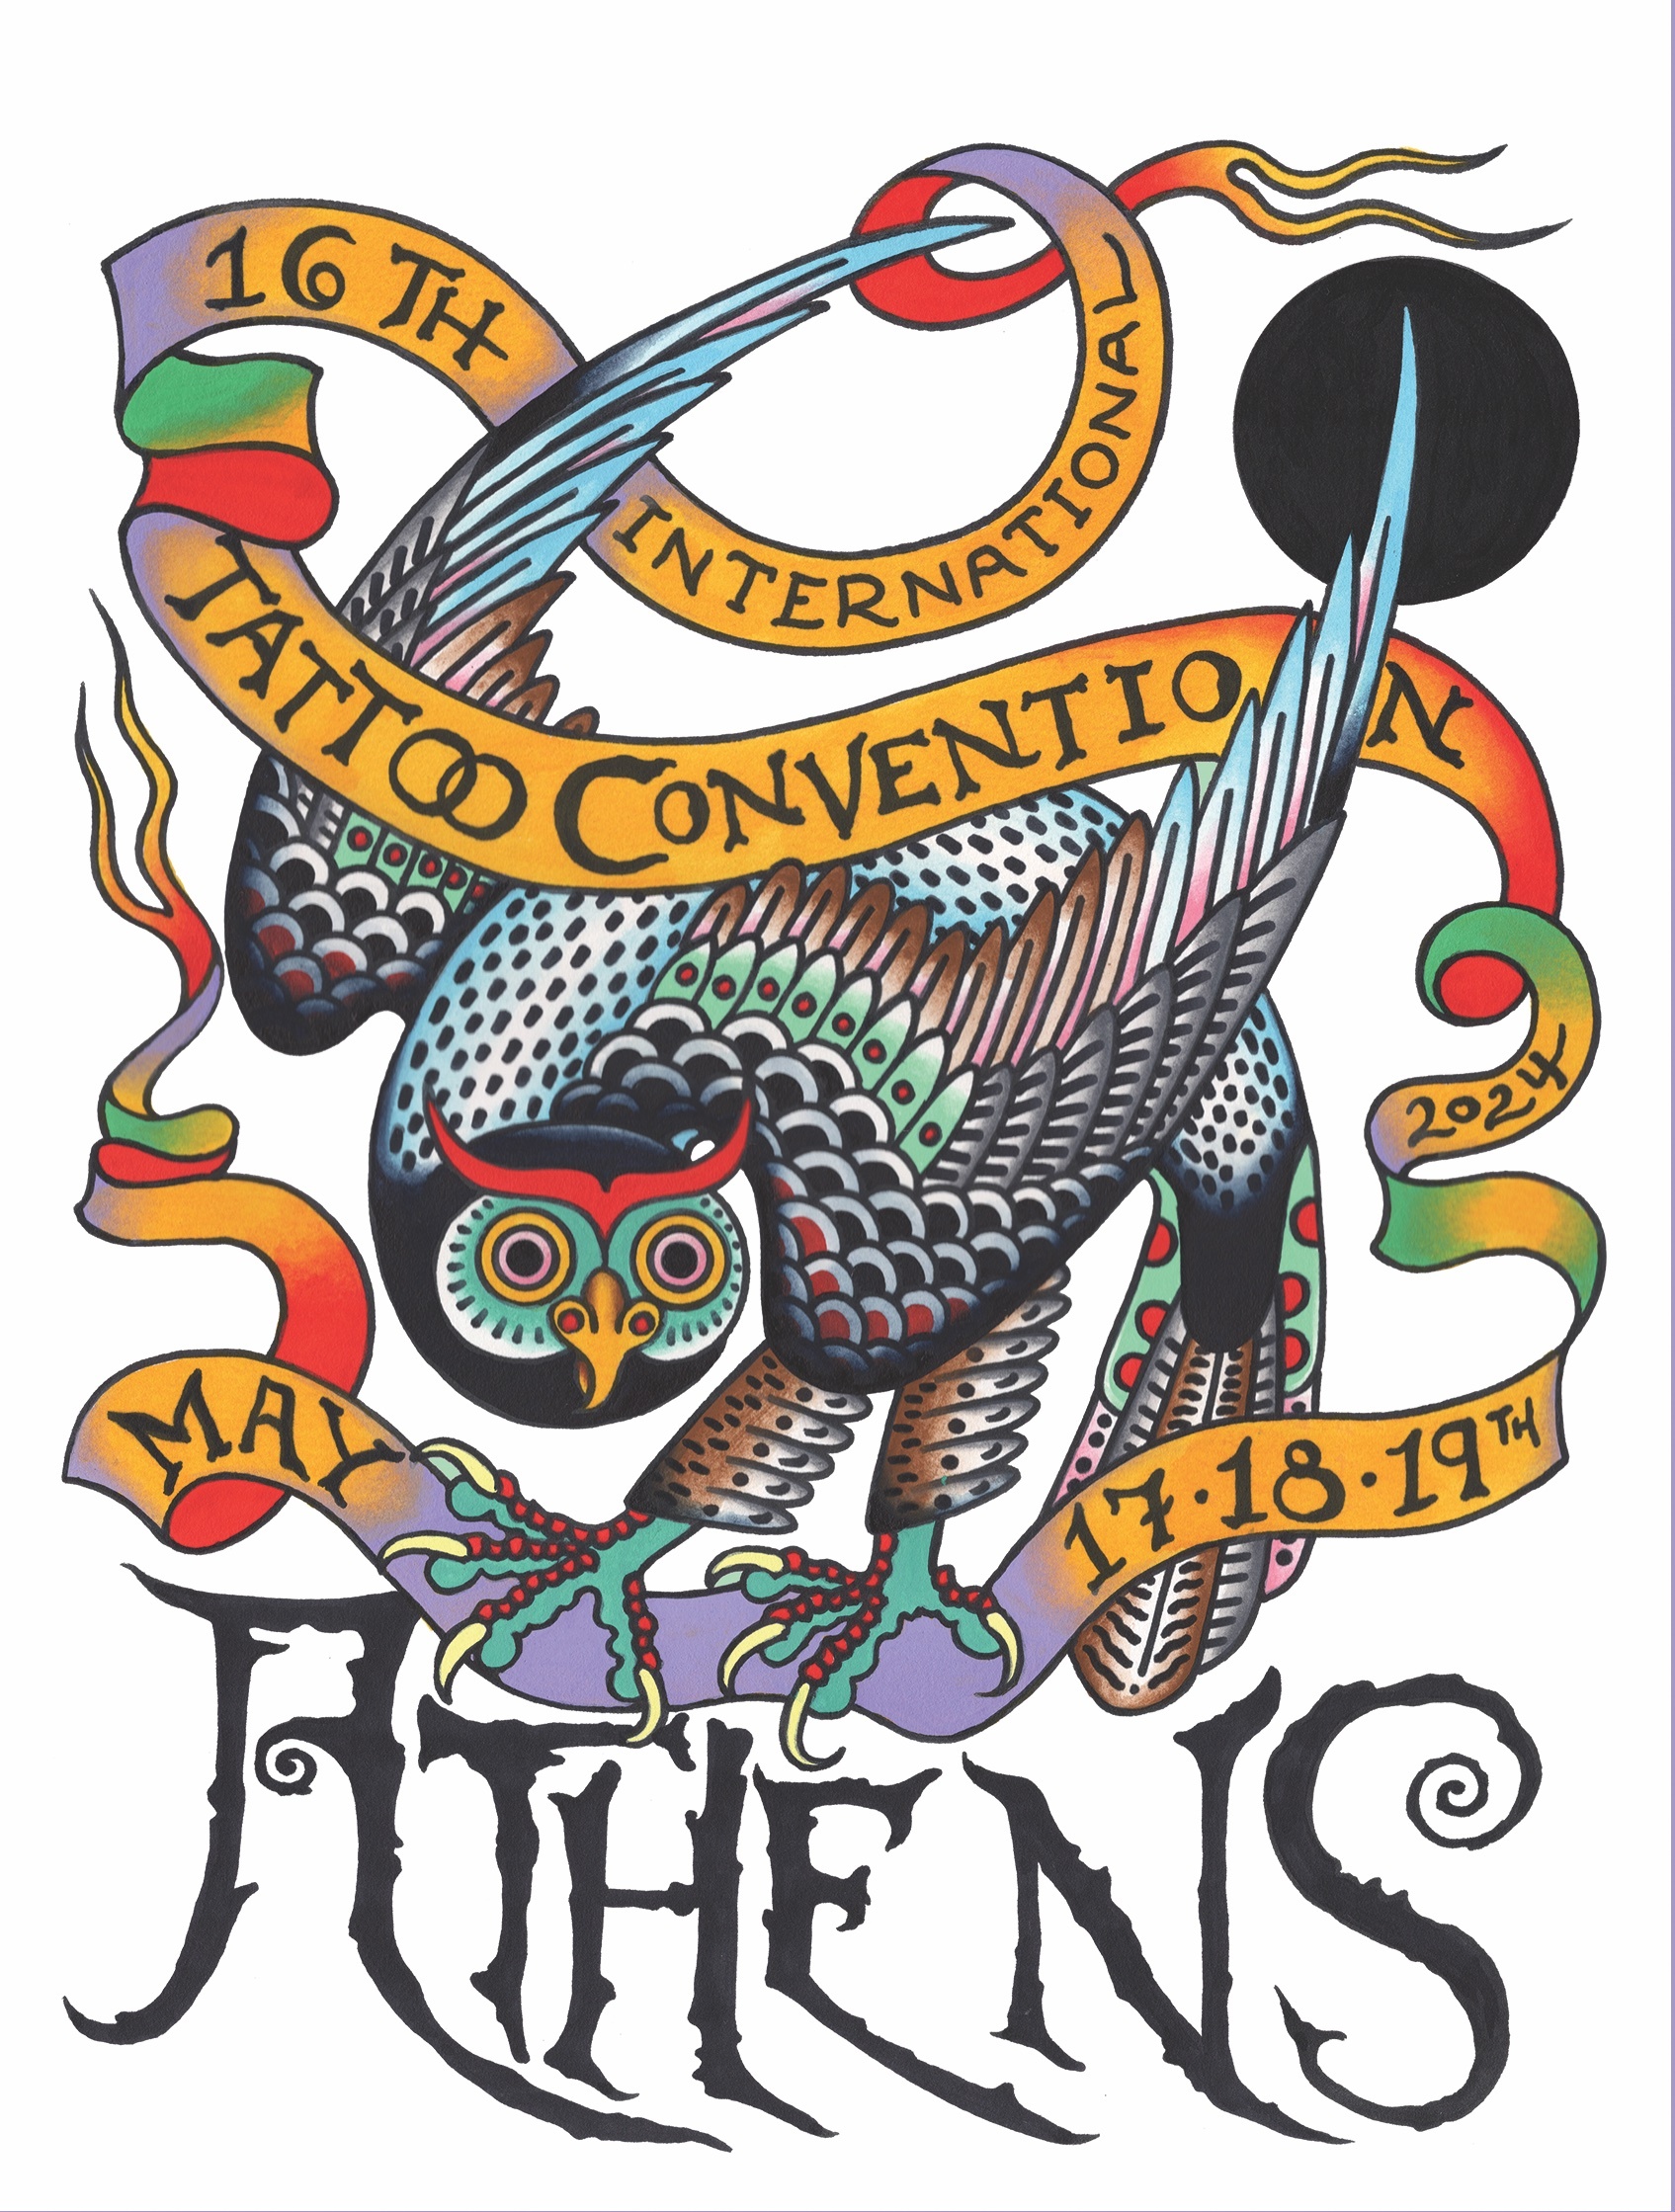 ATHENS TATTOO CONVENTION 